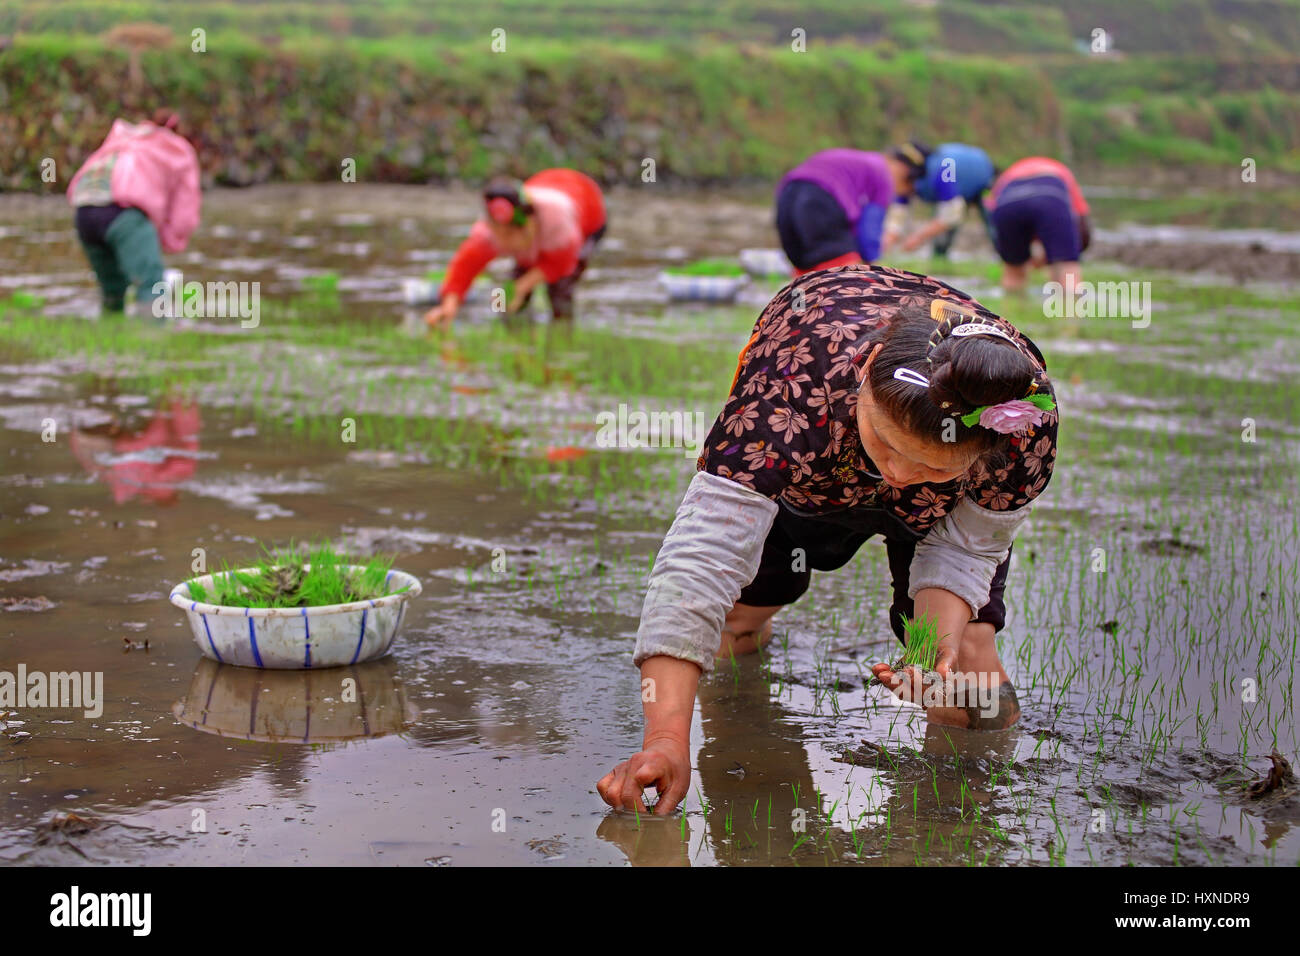 GUIZHOU, CHINA - APRIL 18:  Spring planting rice in Guizhou Province, April 18, 2010. Chinese woman stands knee-deep in water of rice field and holdin Stock Photo